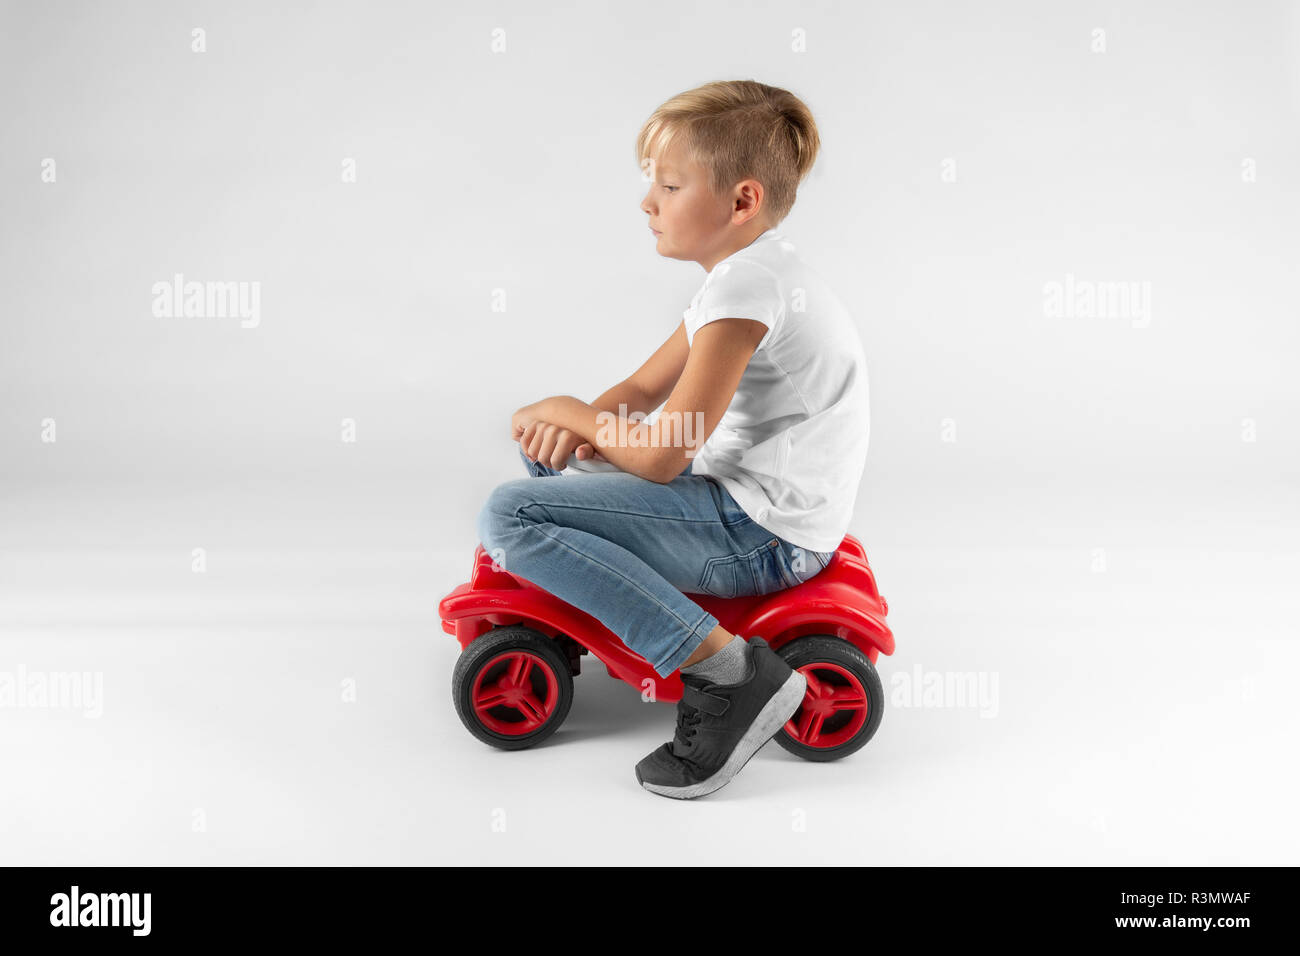 little blond boy is sitting on a toy vehicle an is thinking Stock Photo